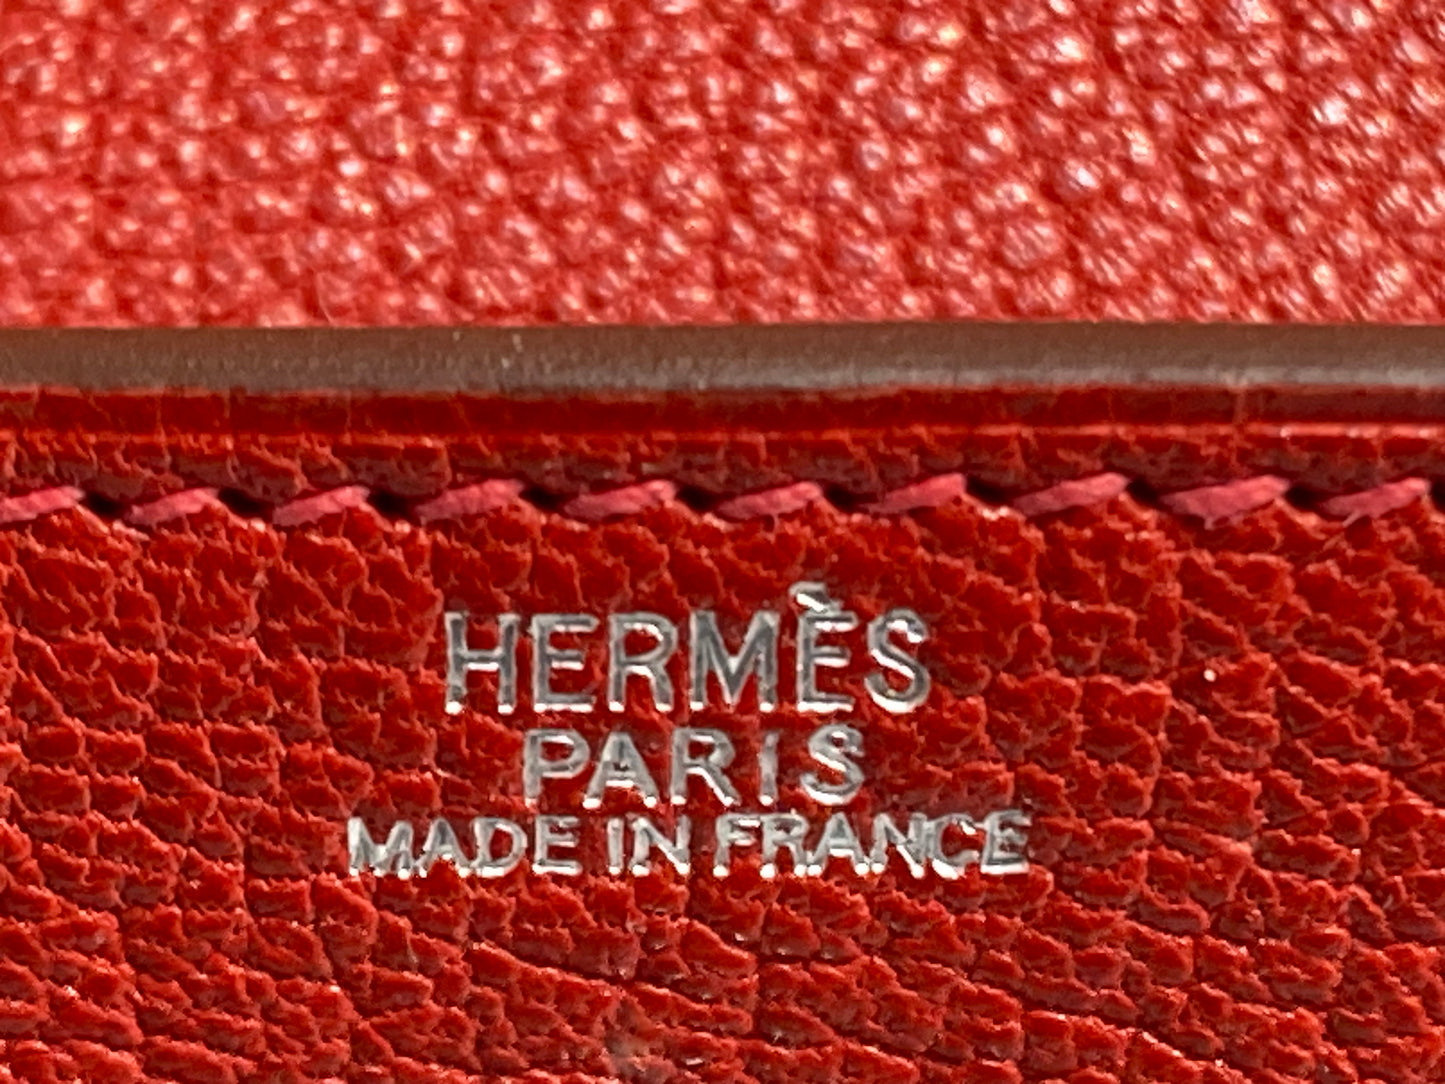 HERMES Leather Kelly Wallet Red